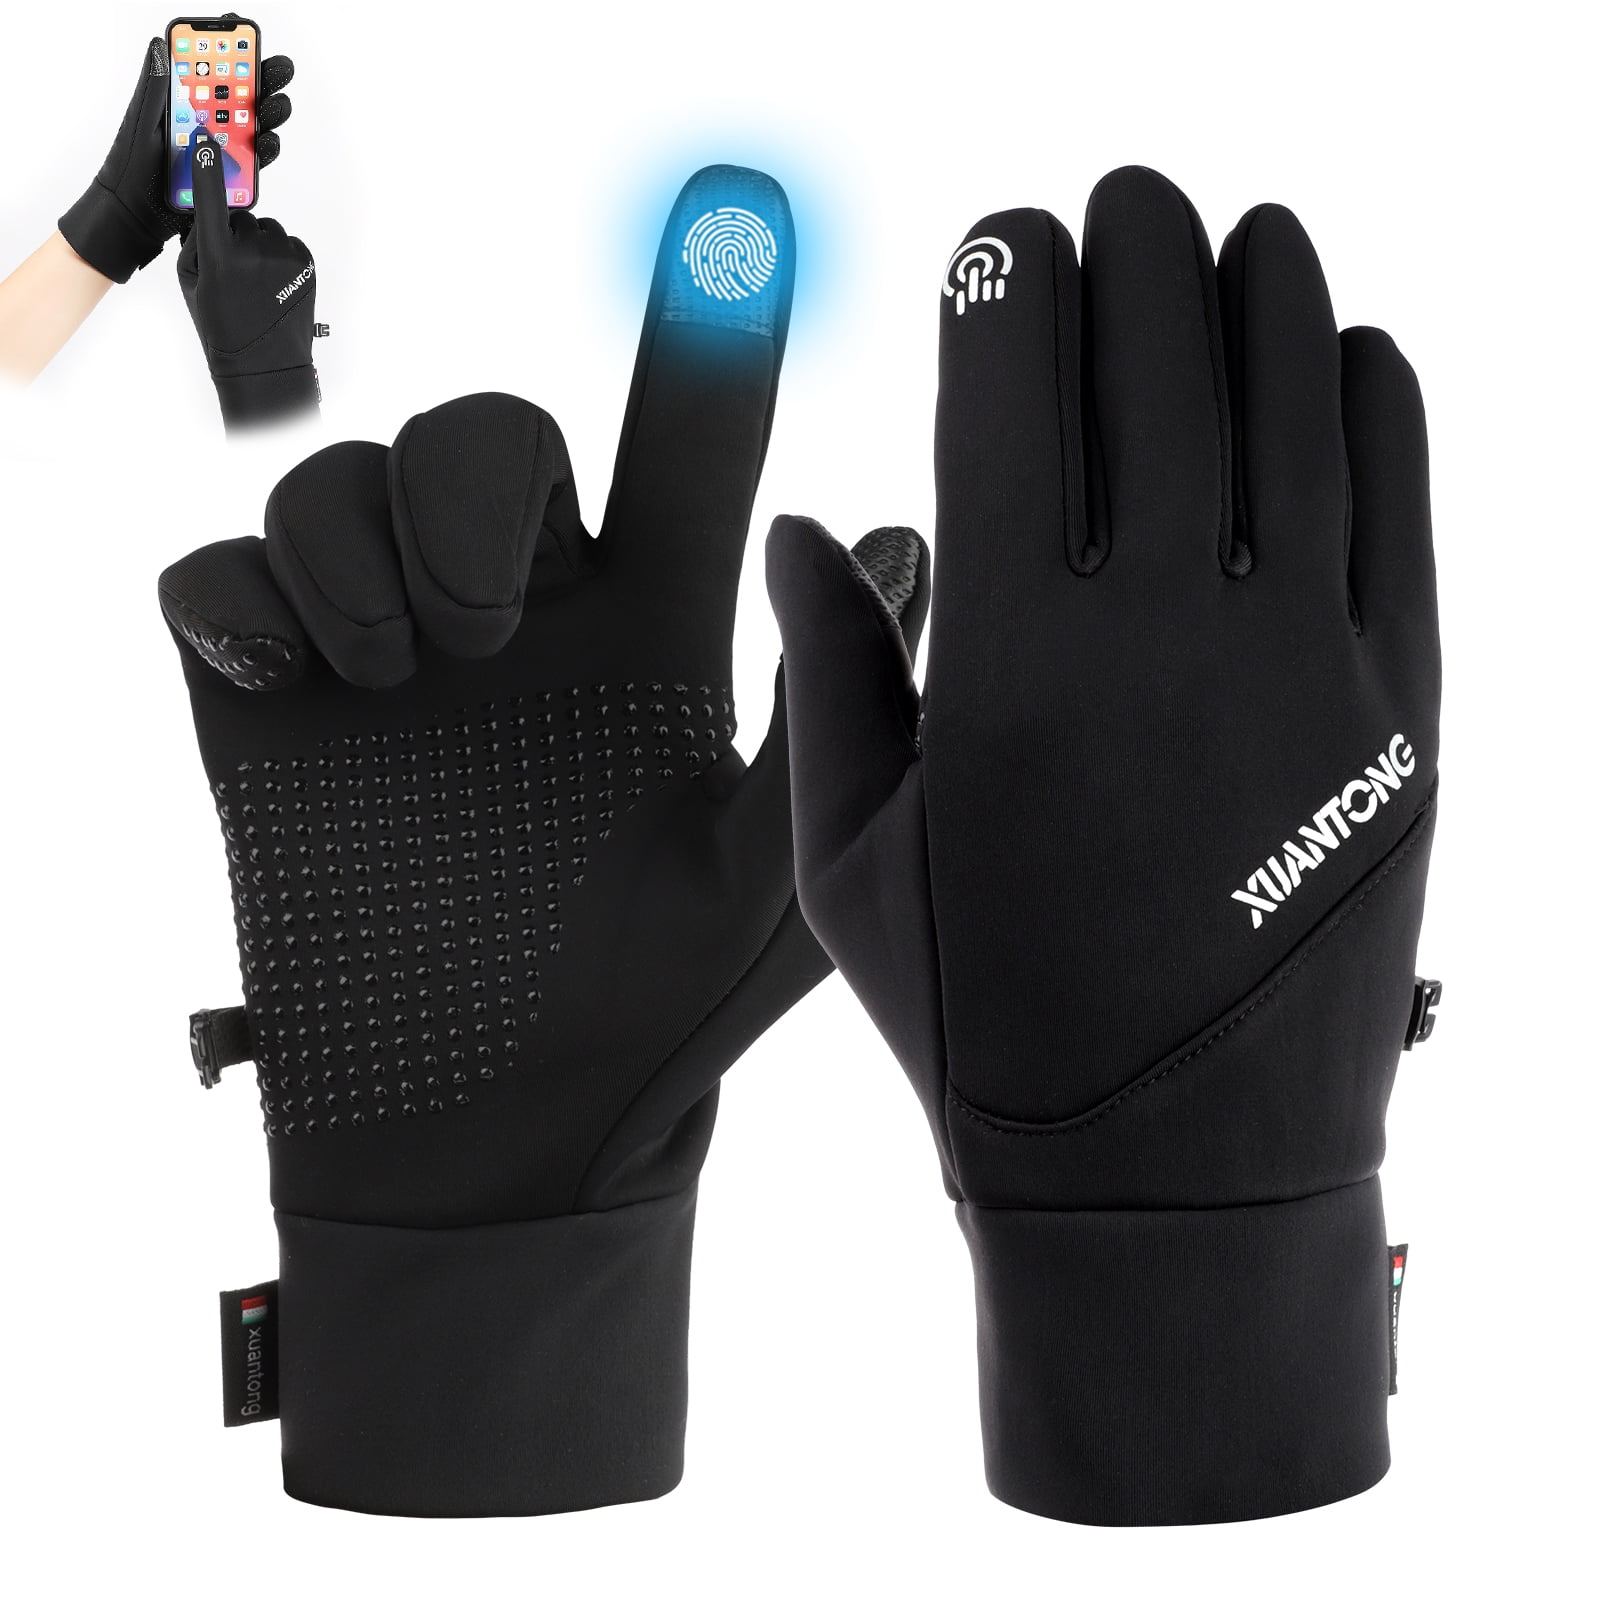 Hot Sports Gloves Winter Warm Windproof Anti-Slip Thermal Touch Screen Gloves UK 